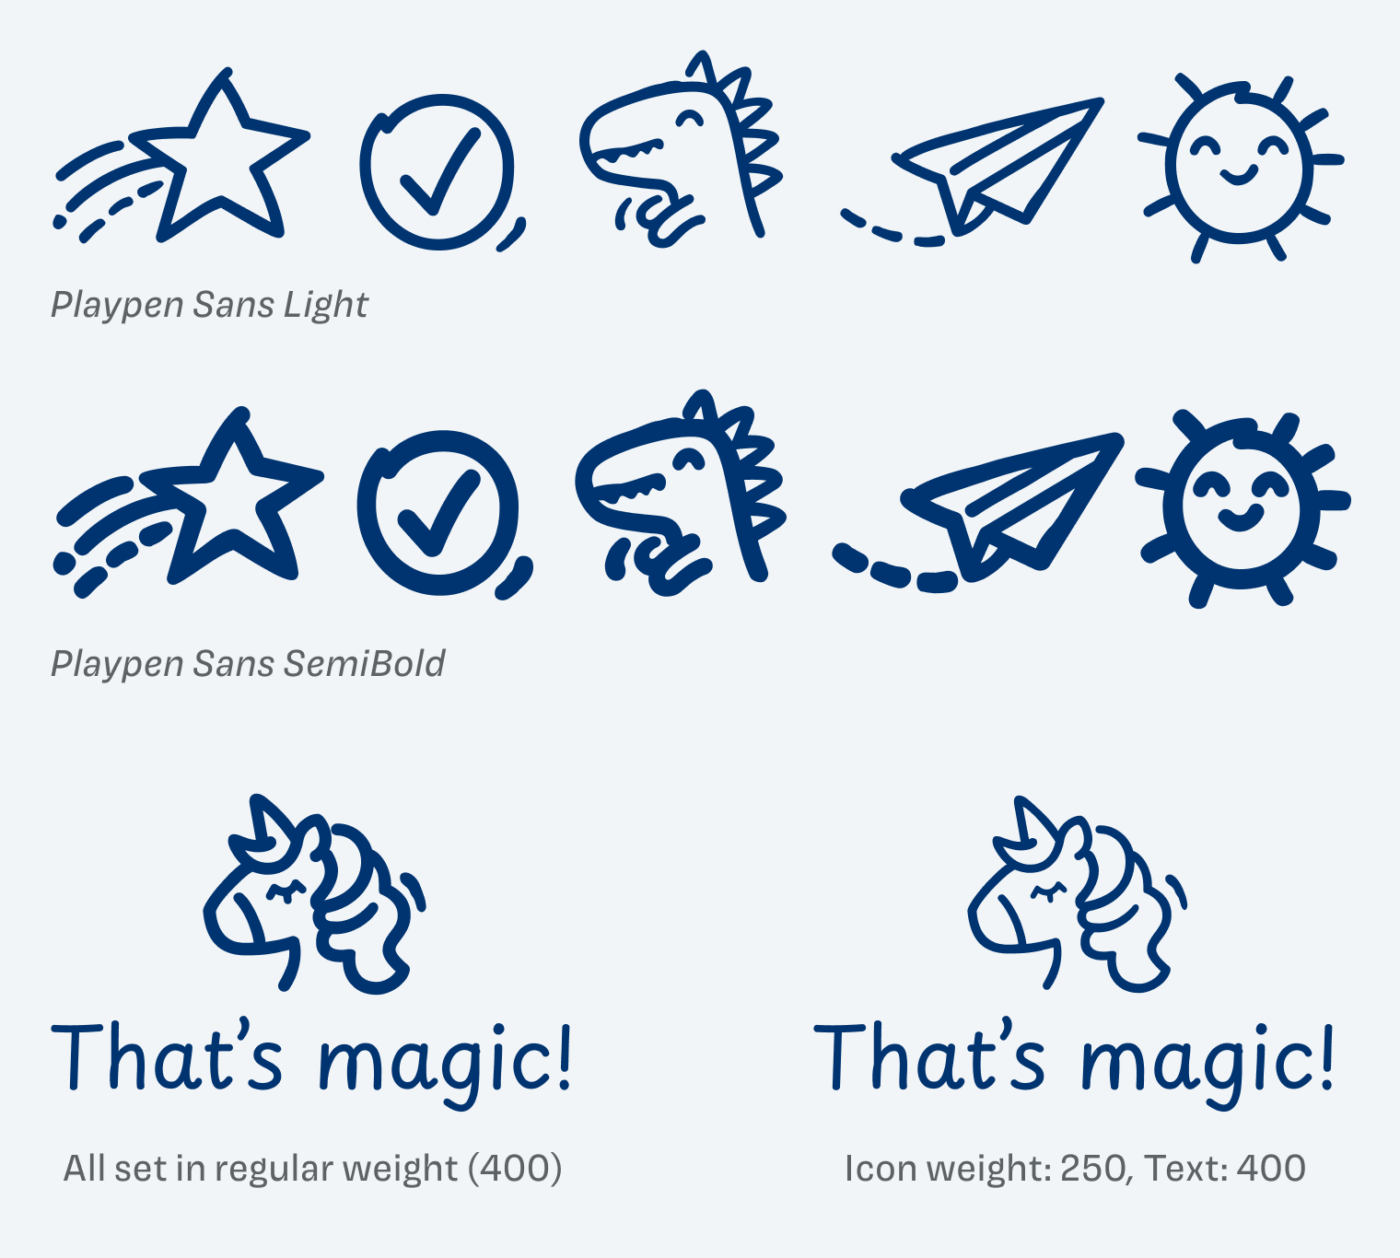 Icon of stars, checkmarks, dinosaurs, a paper plane and smiling sun all in Playpen Sans Light and SemiBold